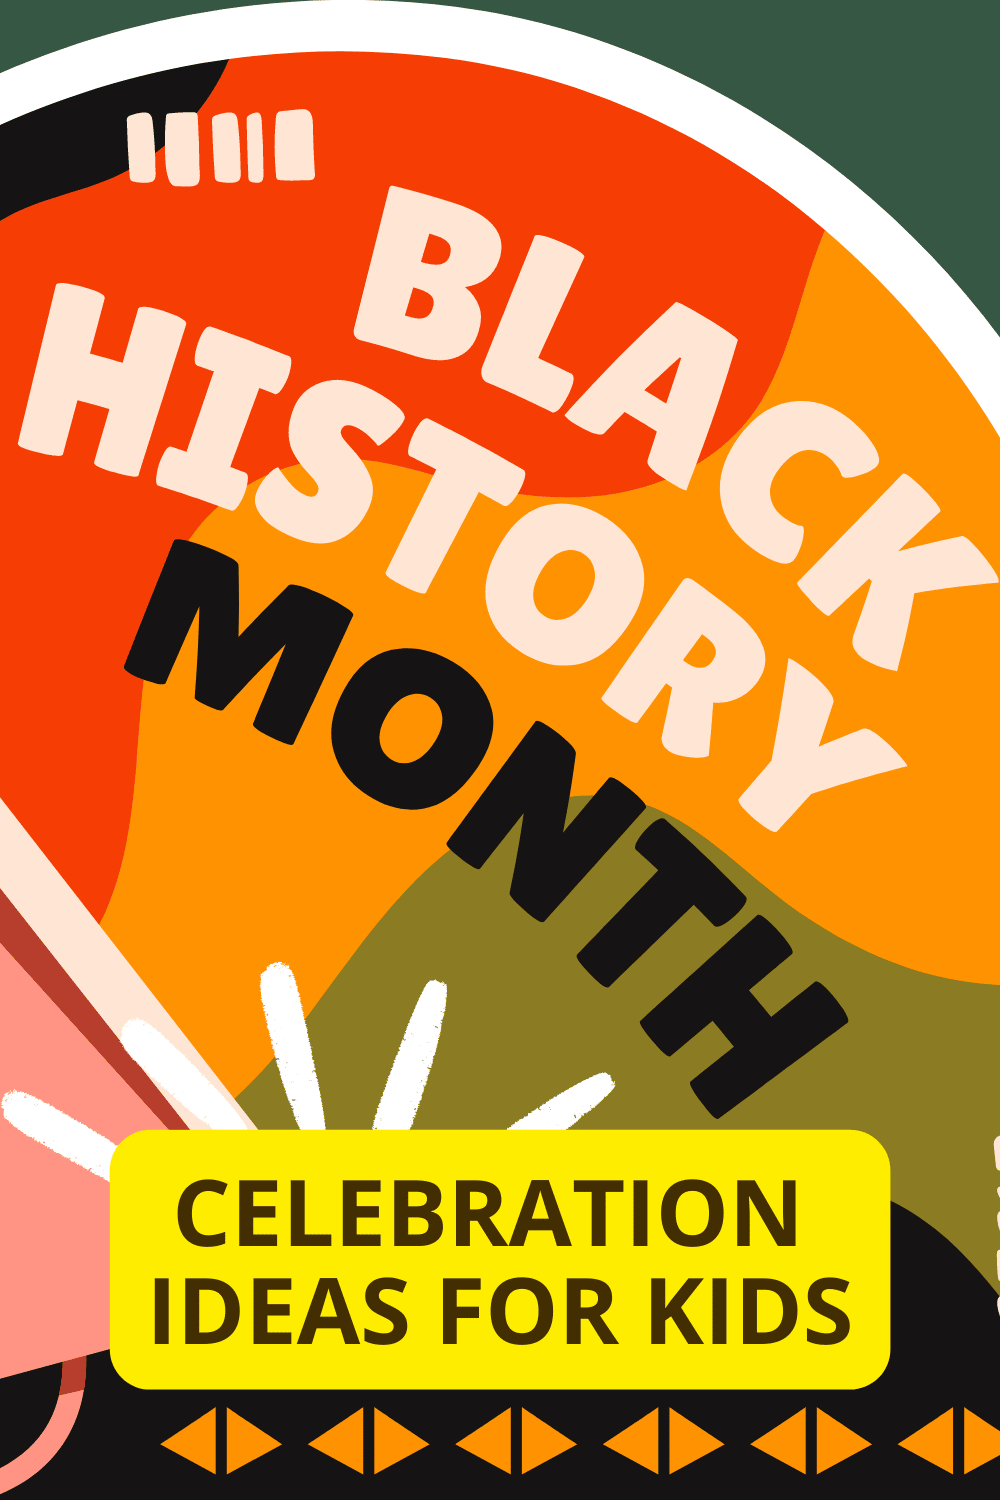 Black History Month Celebration Ideas for Kids TEXT OVER BLACK HISTORY MONTH ART